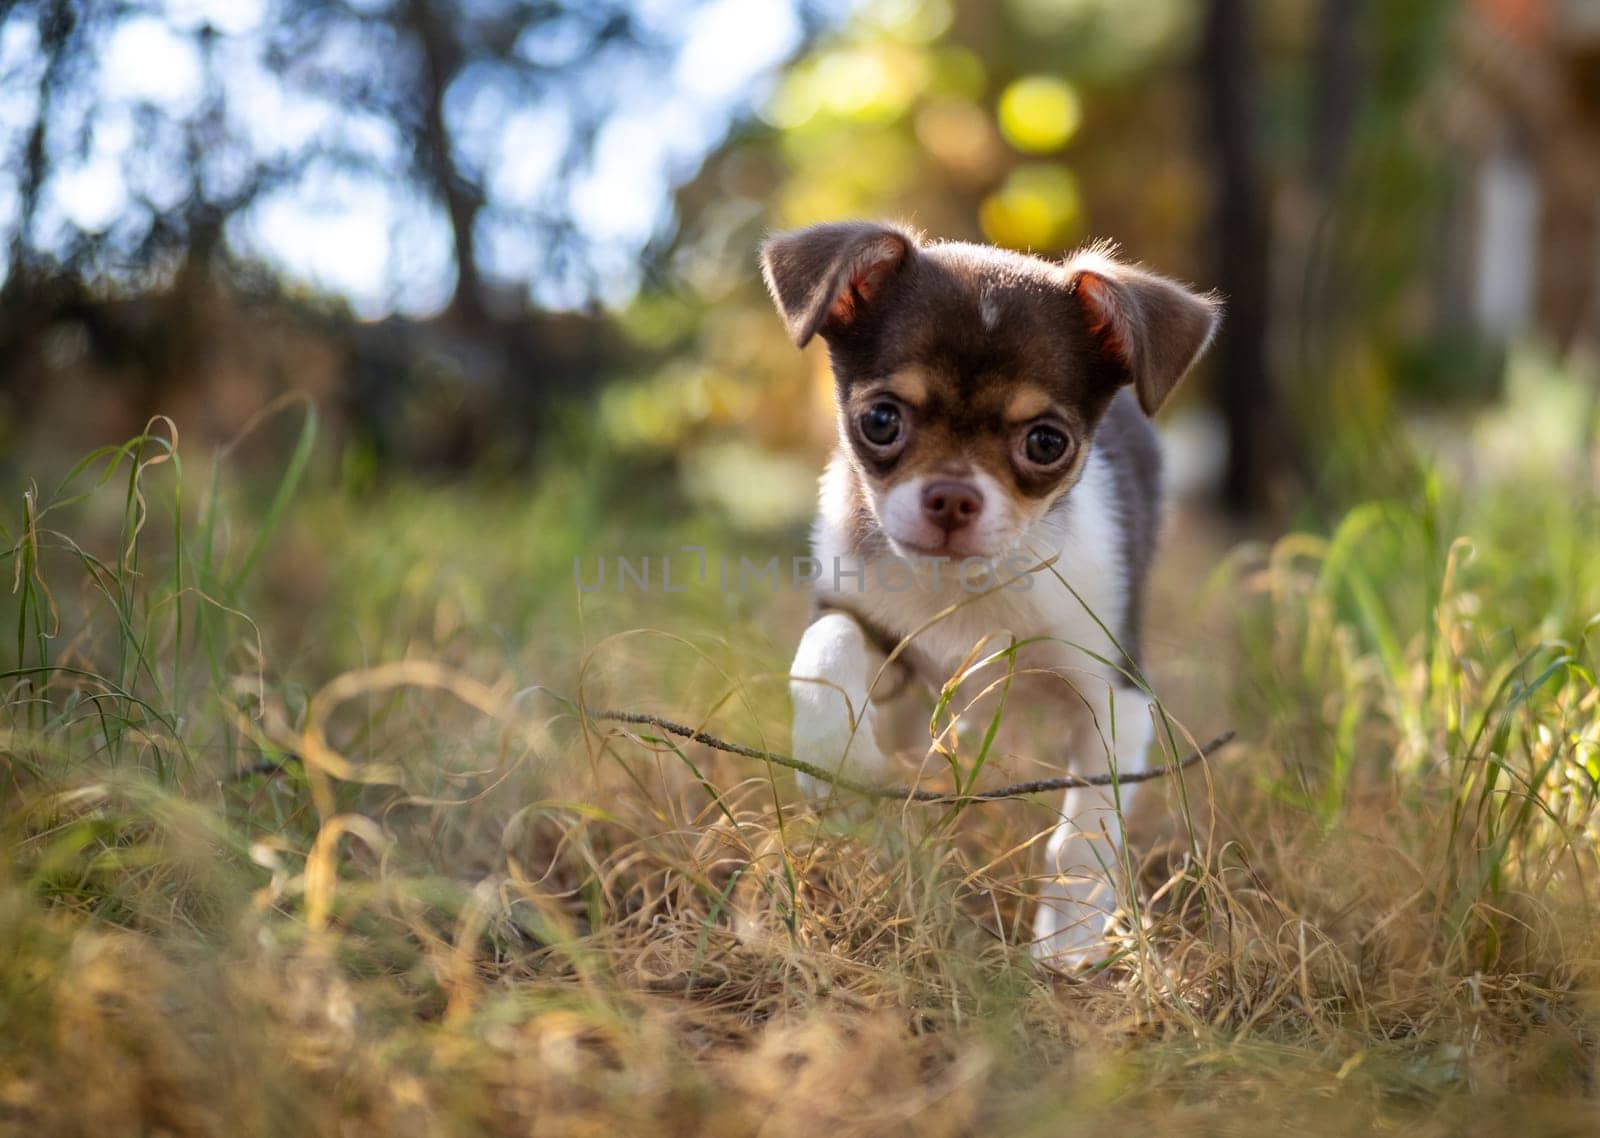 Playful Chihuahua Puppy in Golden Grass by gcm